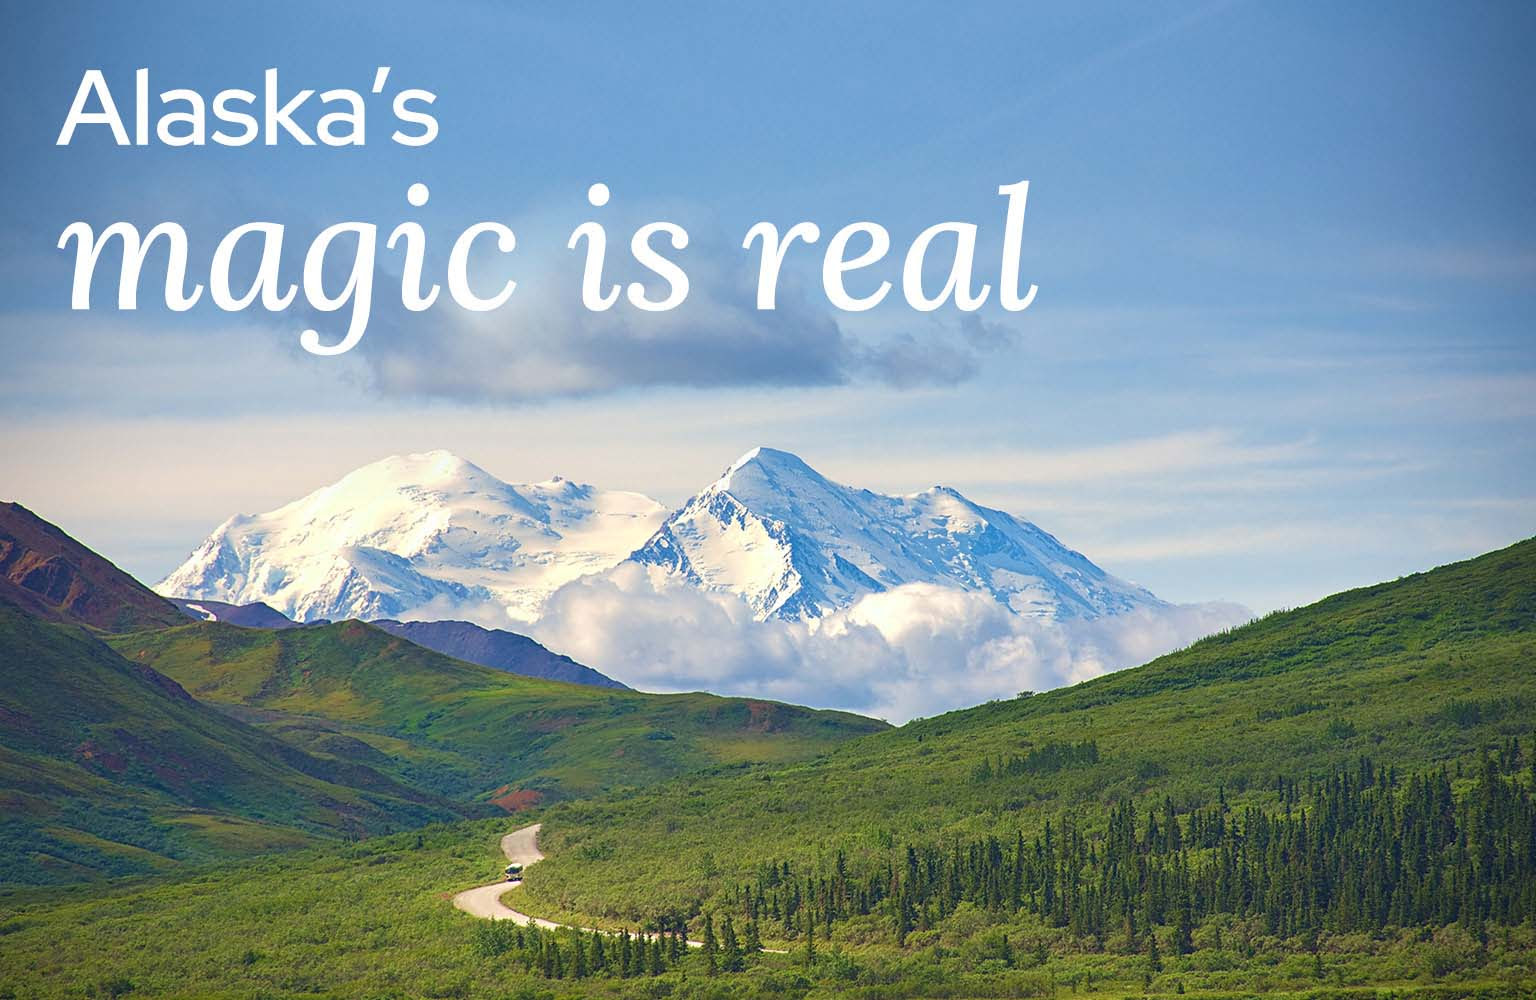 Open green landscape in Alaska with snow covered mountains in the background.Headline reads: Alaska's magic is real.